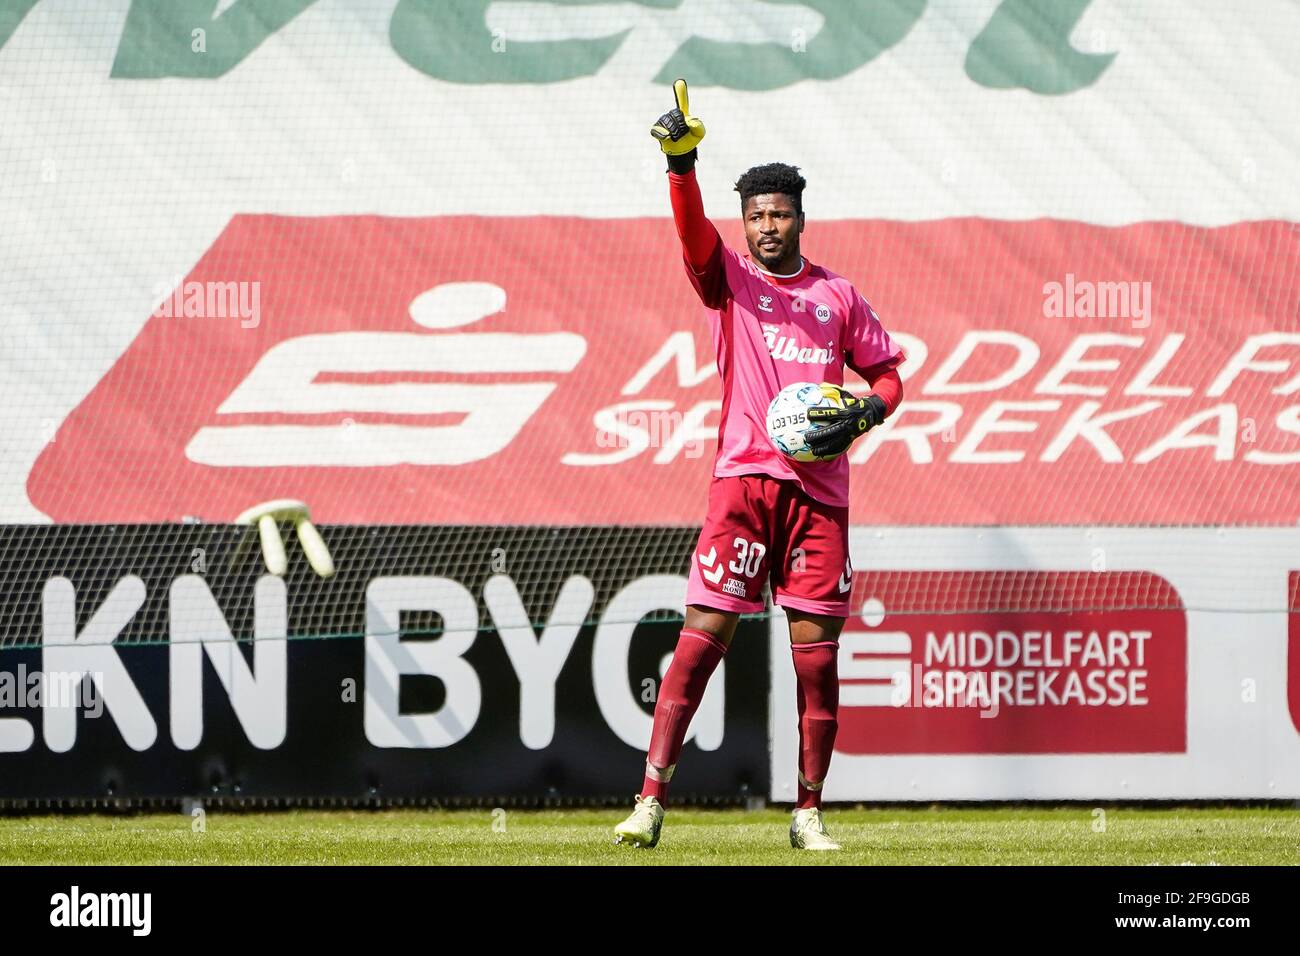 Odense, Denmark. 18th Apr, 2021. Goalkeeper Sayouba Mande (30) of OB seen during the 3F Superliga match between Odense Boldklub and Sonderjyske at Nature Energy Park in Odense. (Photo Credit: Gonzales Photo/Alamy Live News Stock Photo